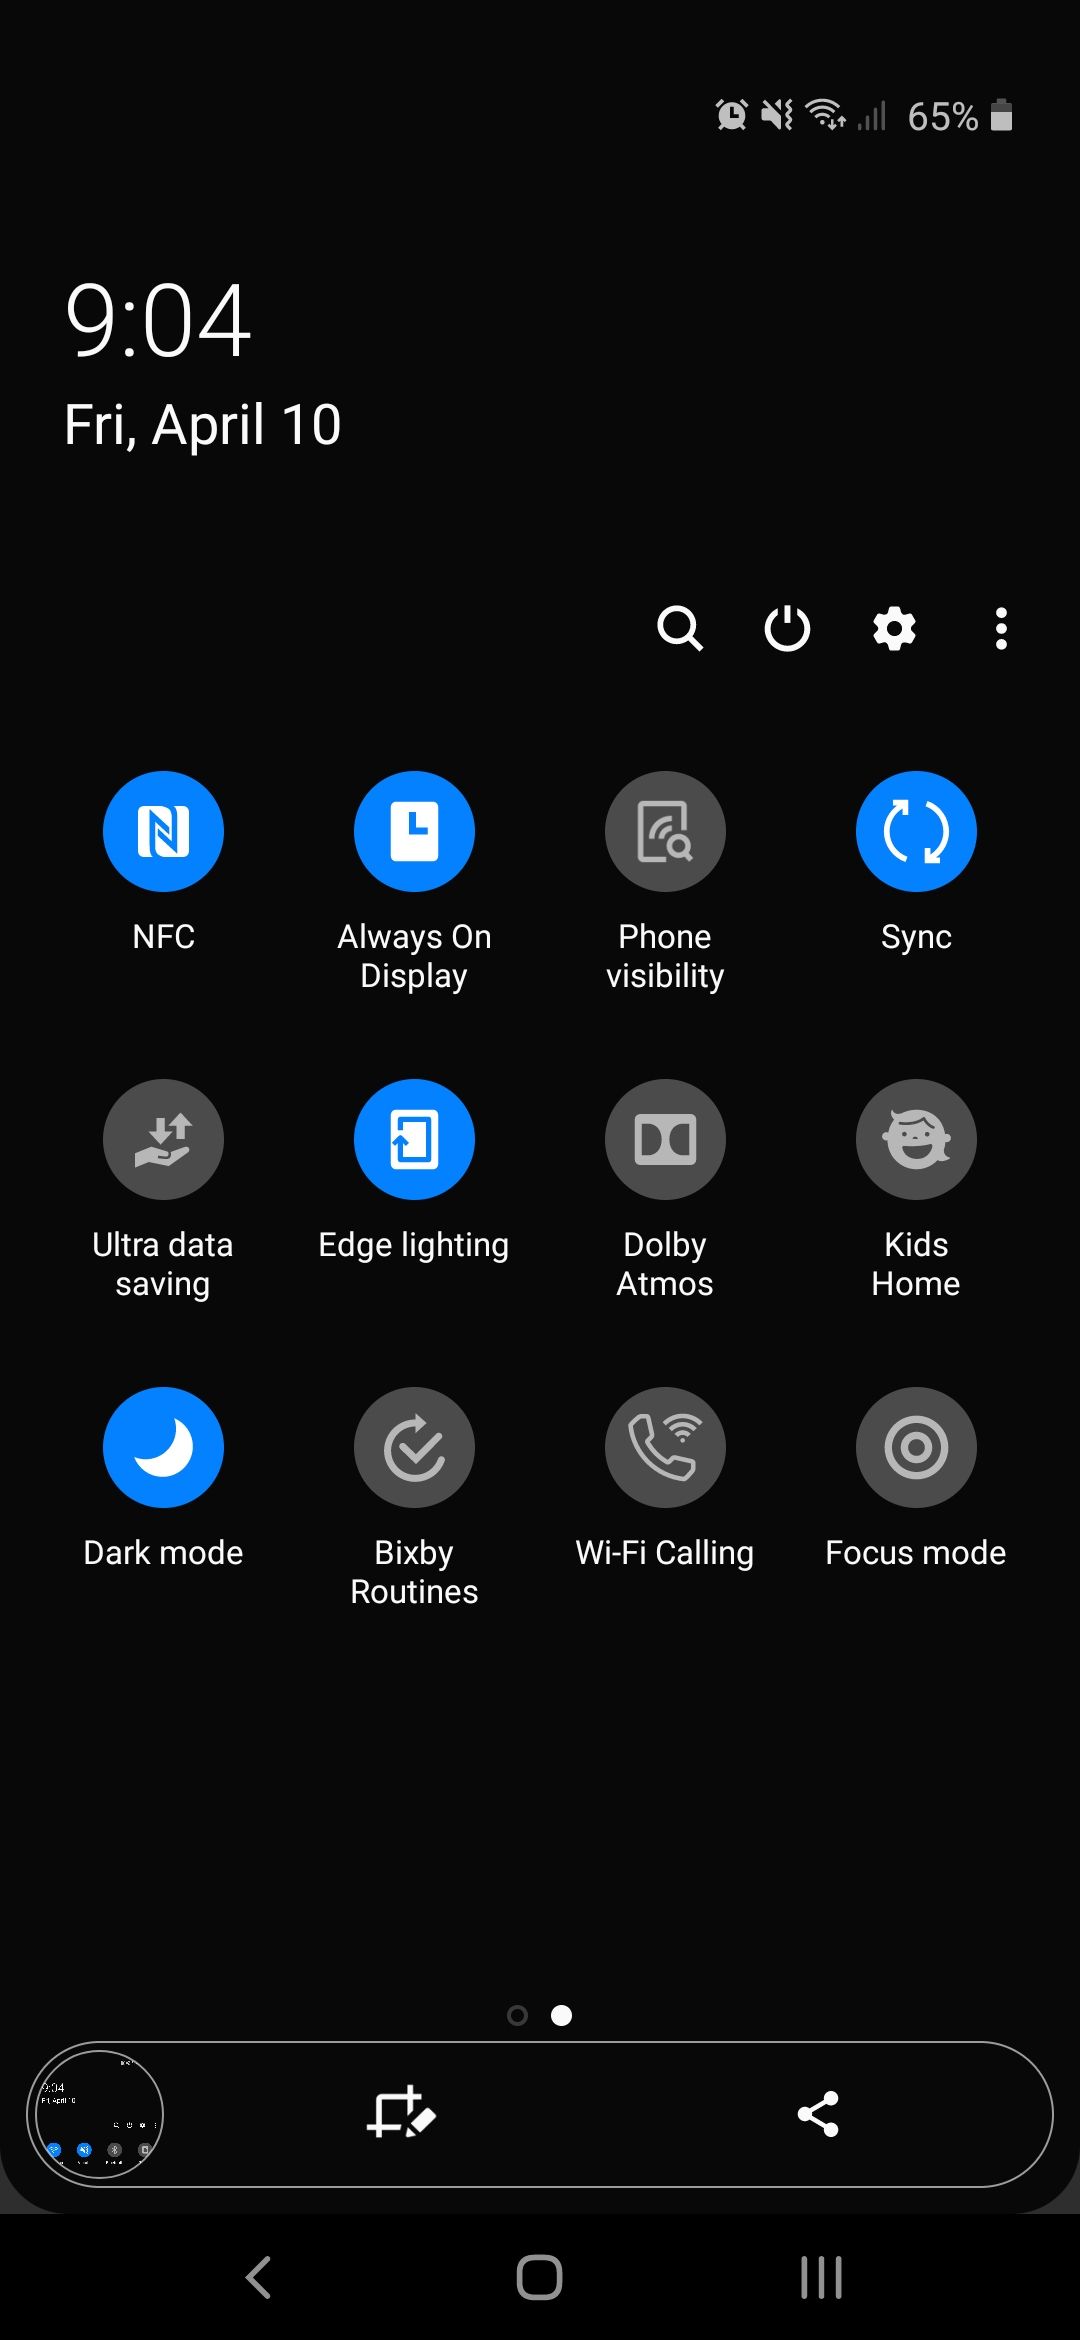 Solved: Can't find Screen Recorder - Samsung Community